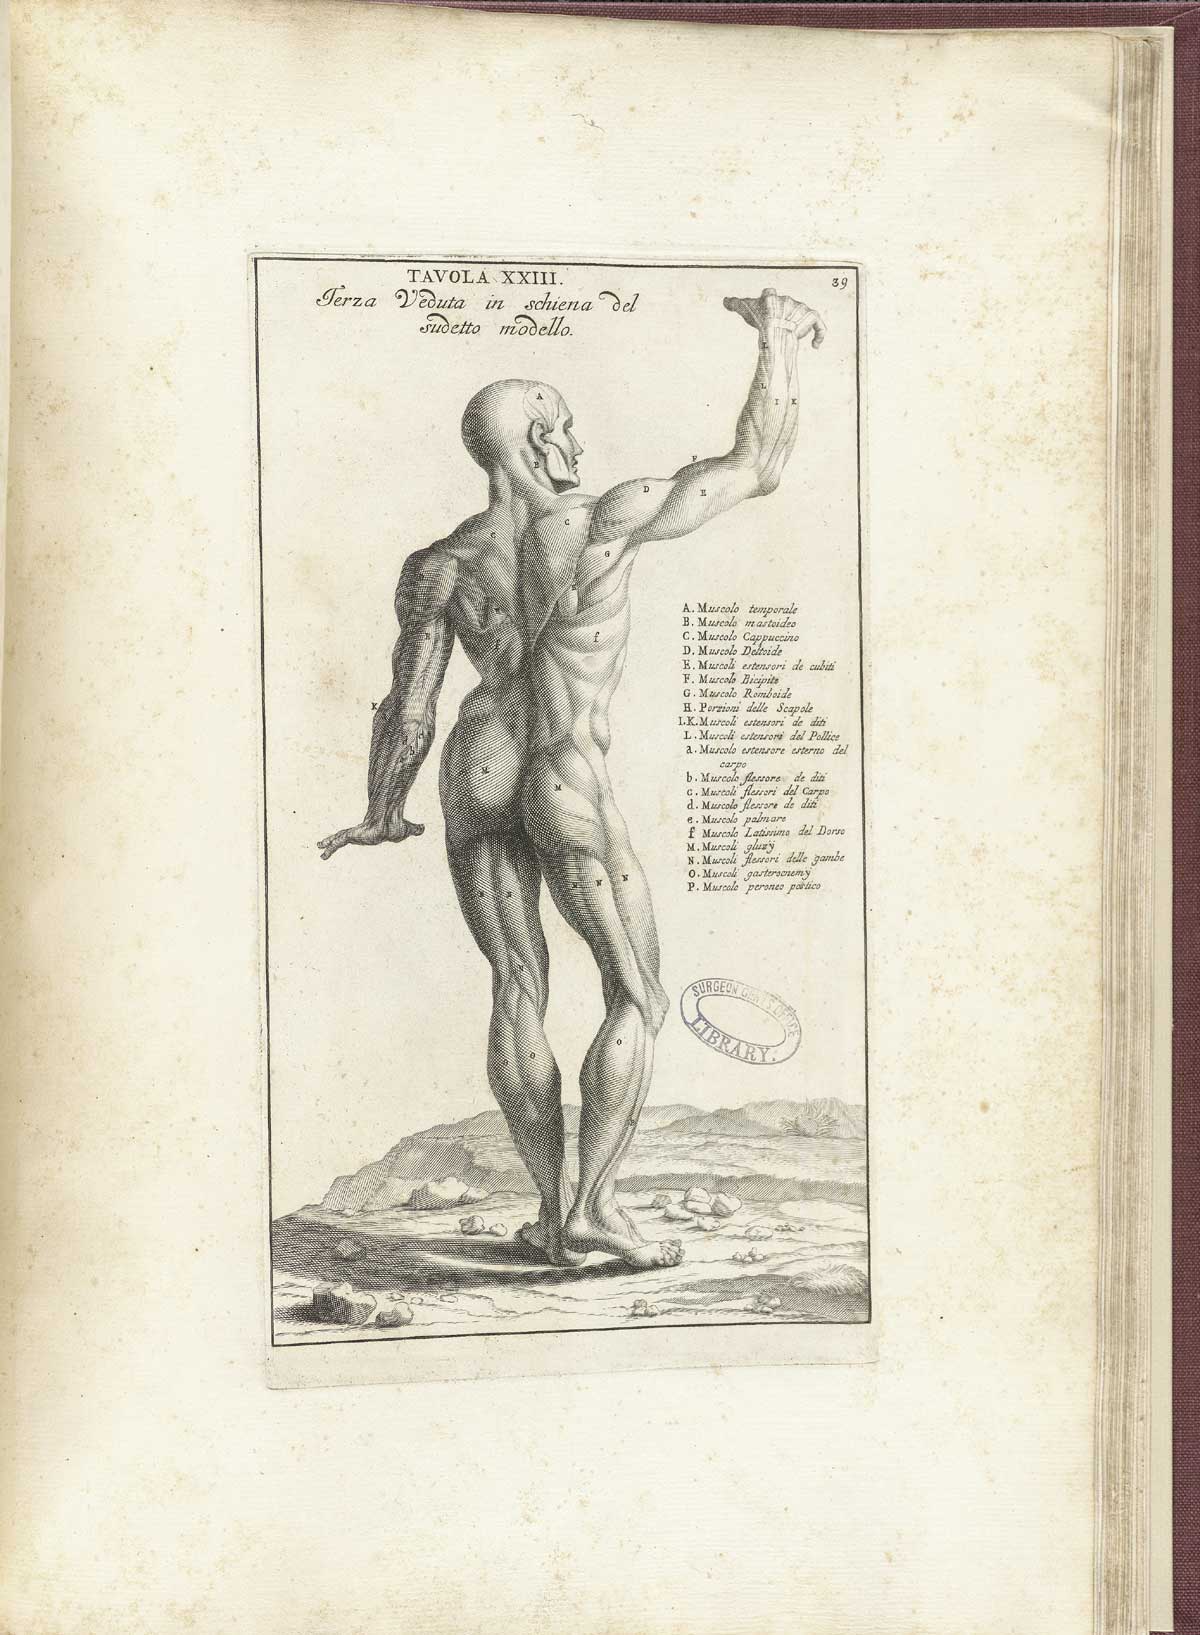 Engraving of the facing view of the Farnese Hercules, a statue of a nude Hercules standing leaning with his left shoulder against his club with a lion’s skin over it; from Bernardino Genga’s Anatomia per uso et intelligenza del disegno, NLM Call no.: WZ 250 G329an 1691.